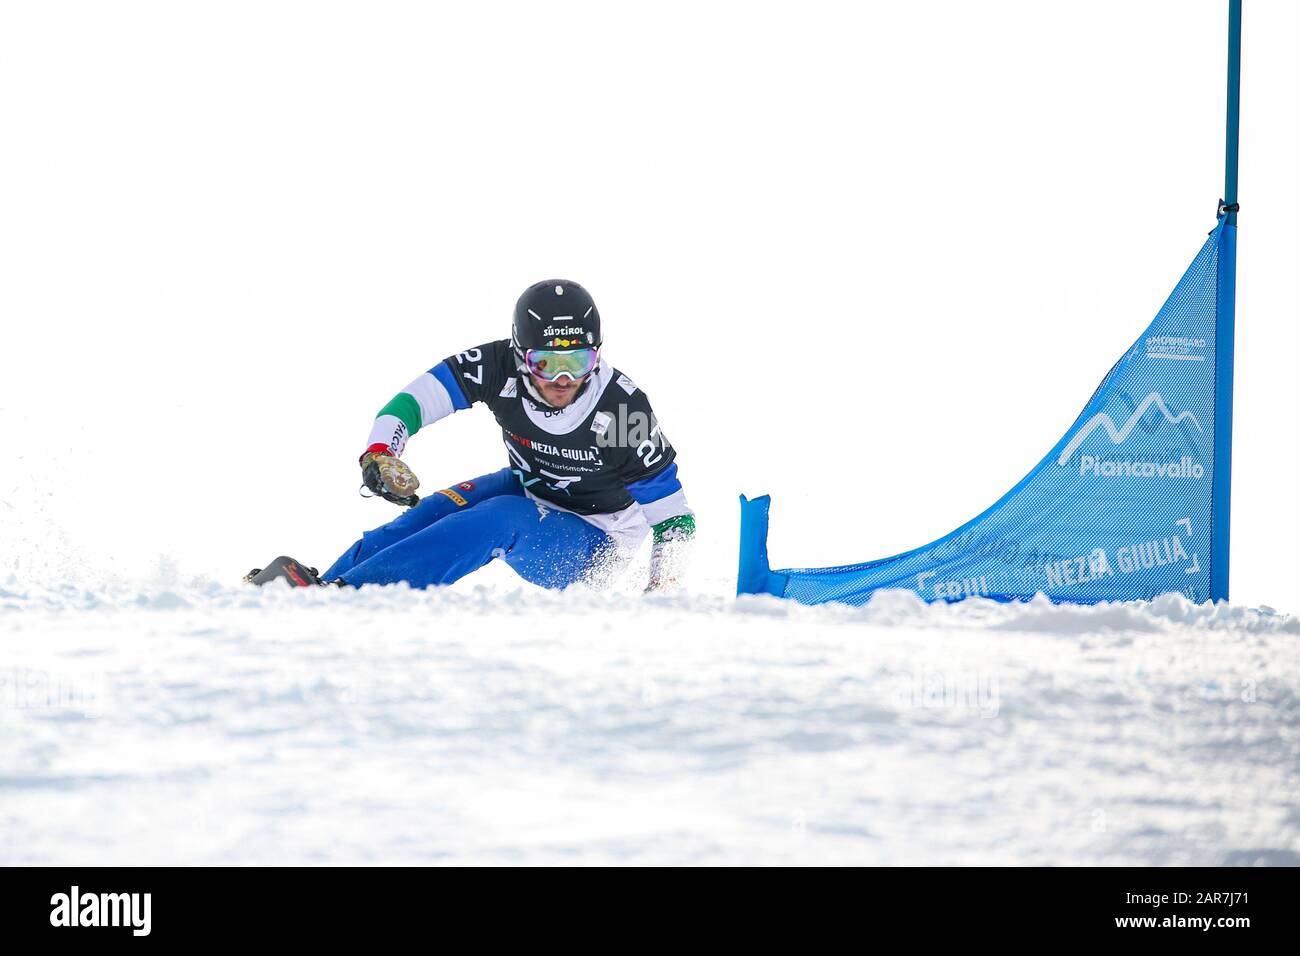 march aaron ita during FIS Snowboard World Cup - Parallel Slalom PSL, Piancavallo - Aviano (PN), Italy, 25 Jan 2020, Winter Sports Snowboard Stock Photo